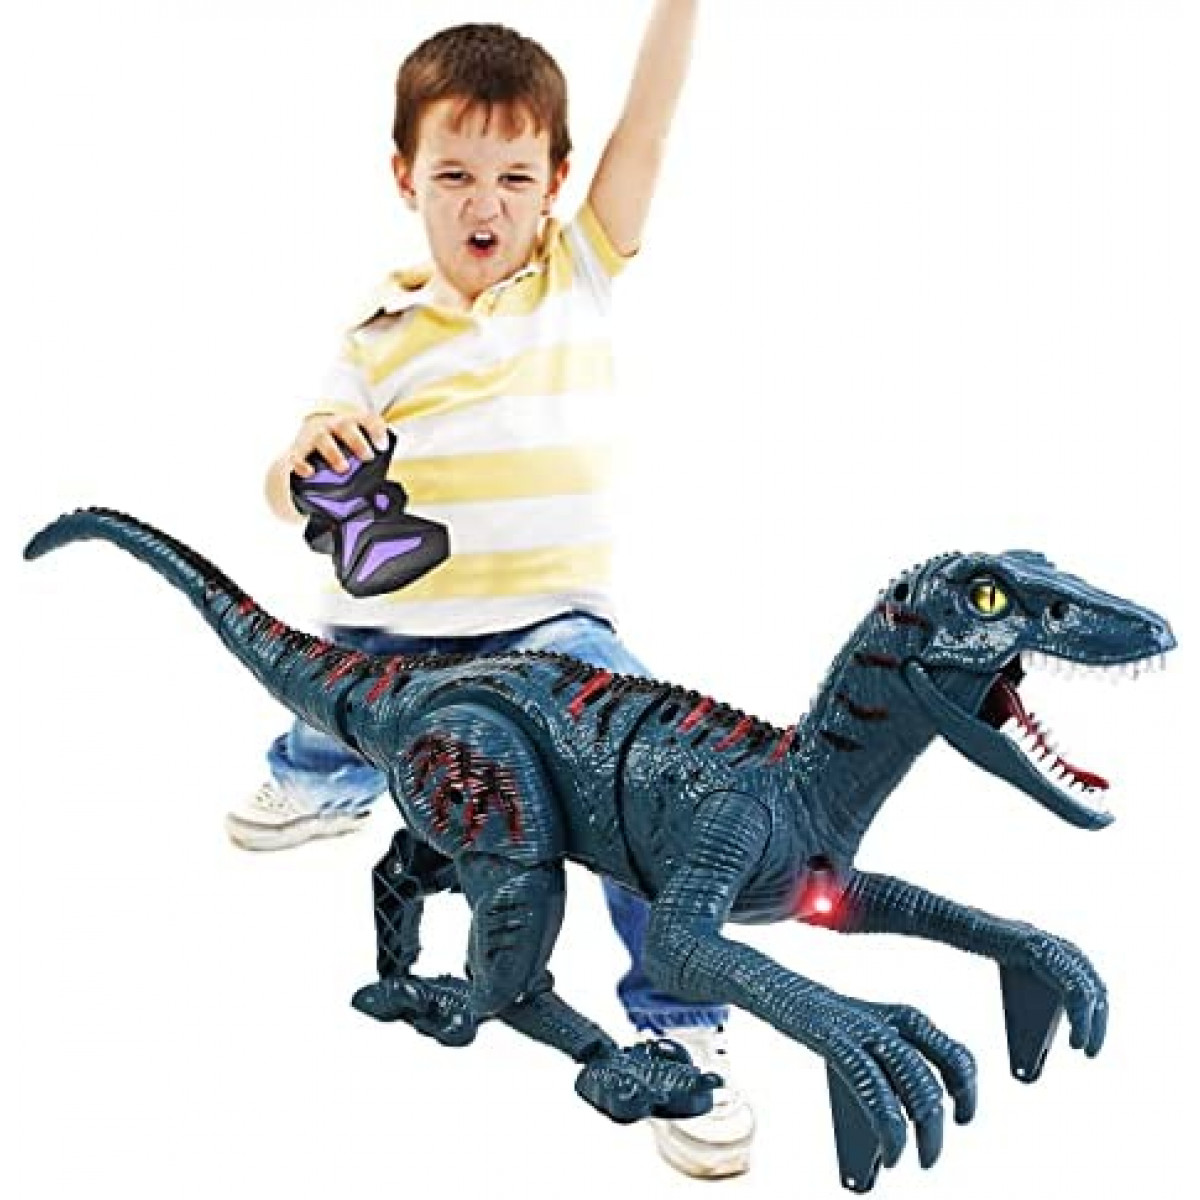 Remote Control Dinosaur Toy for Kids 5-7 8-12 - RC